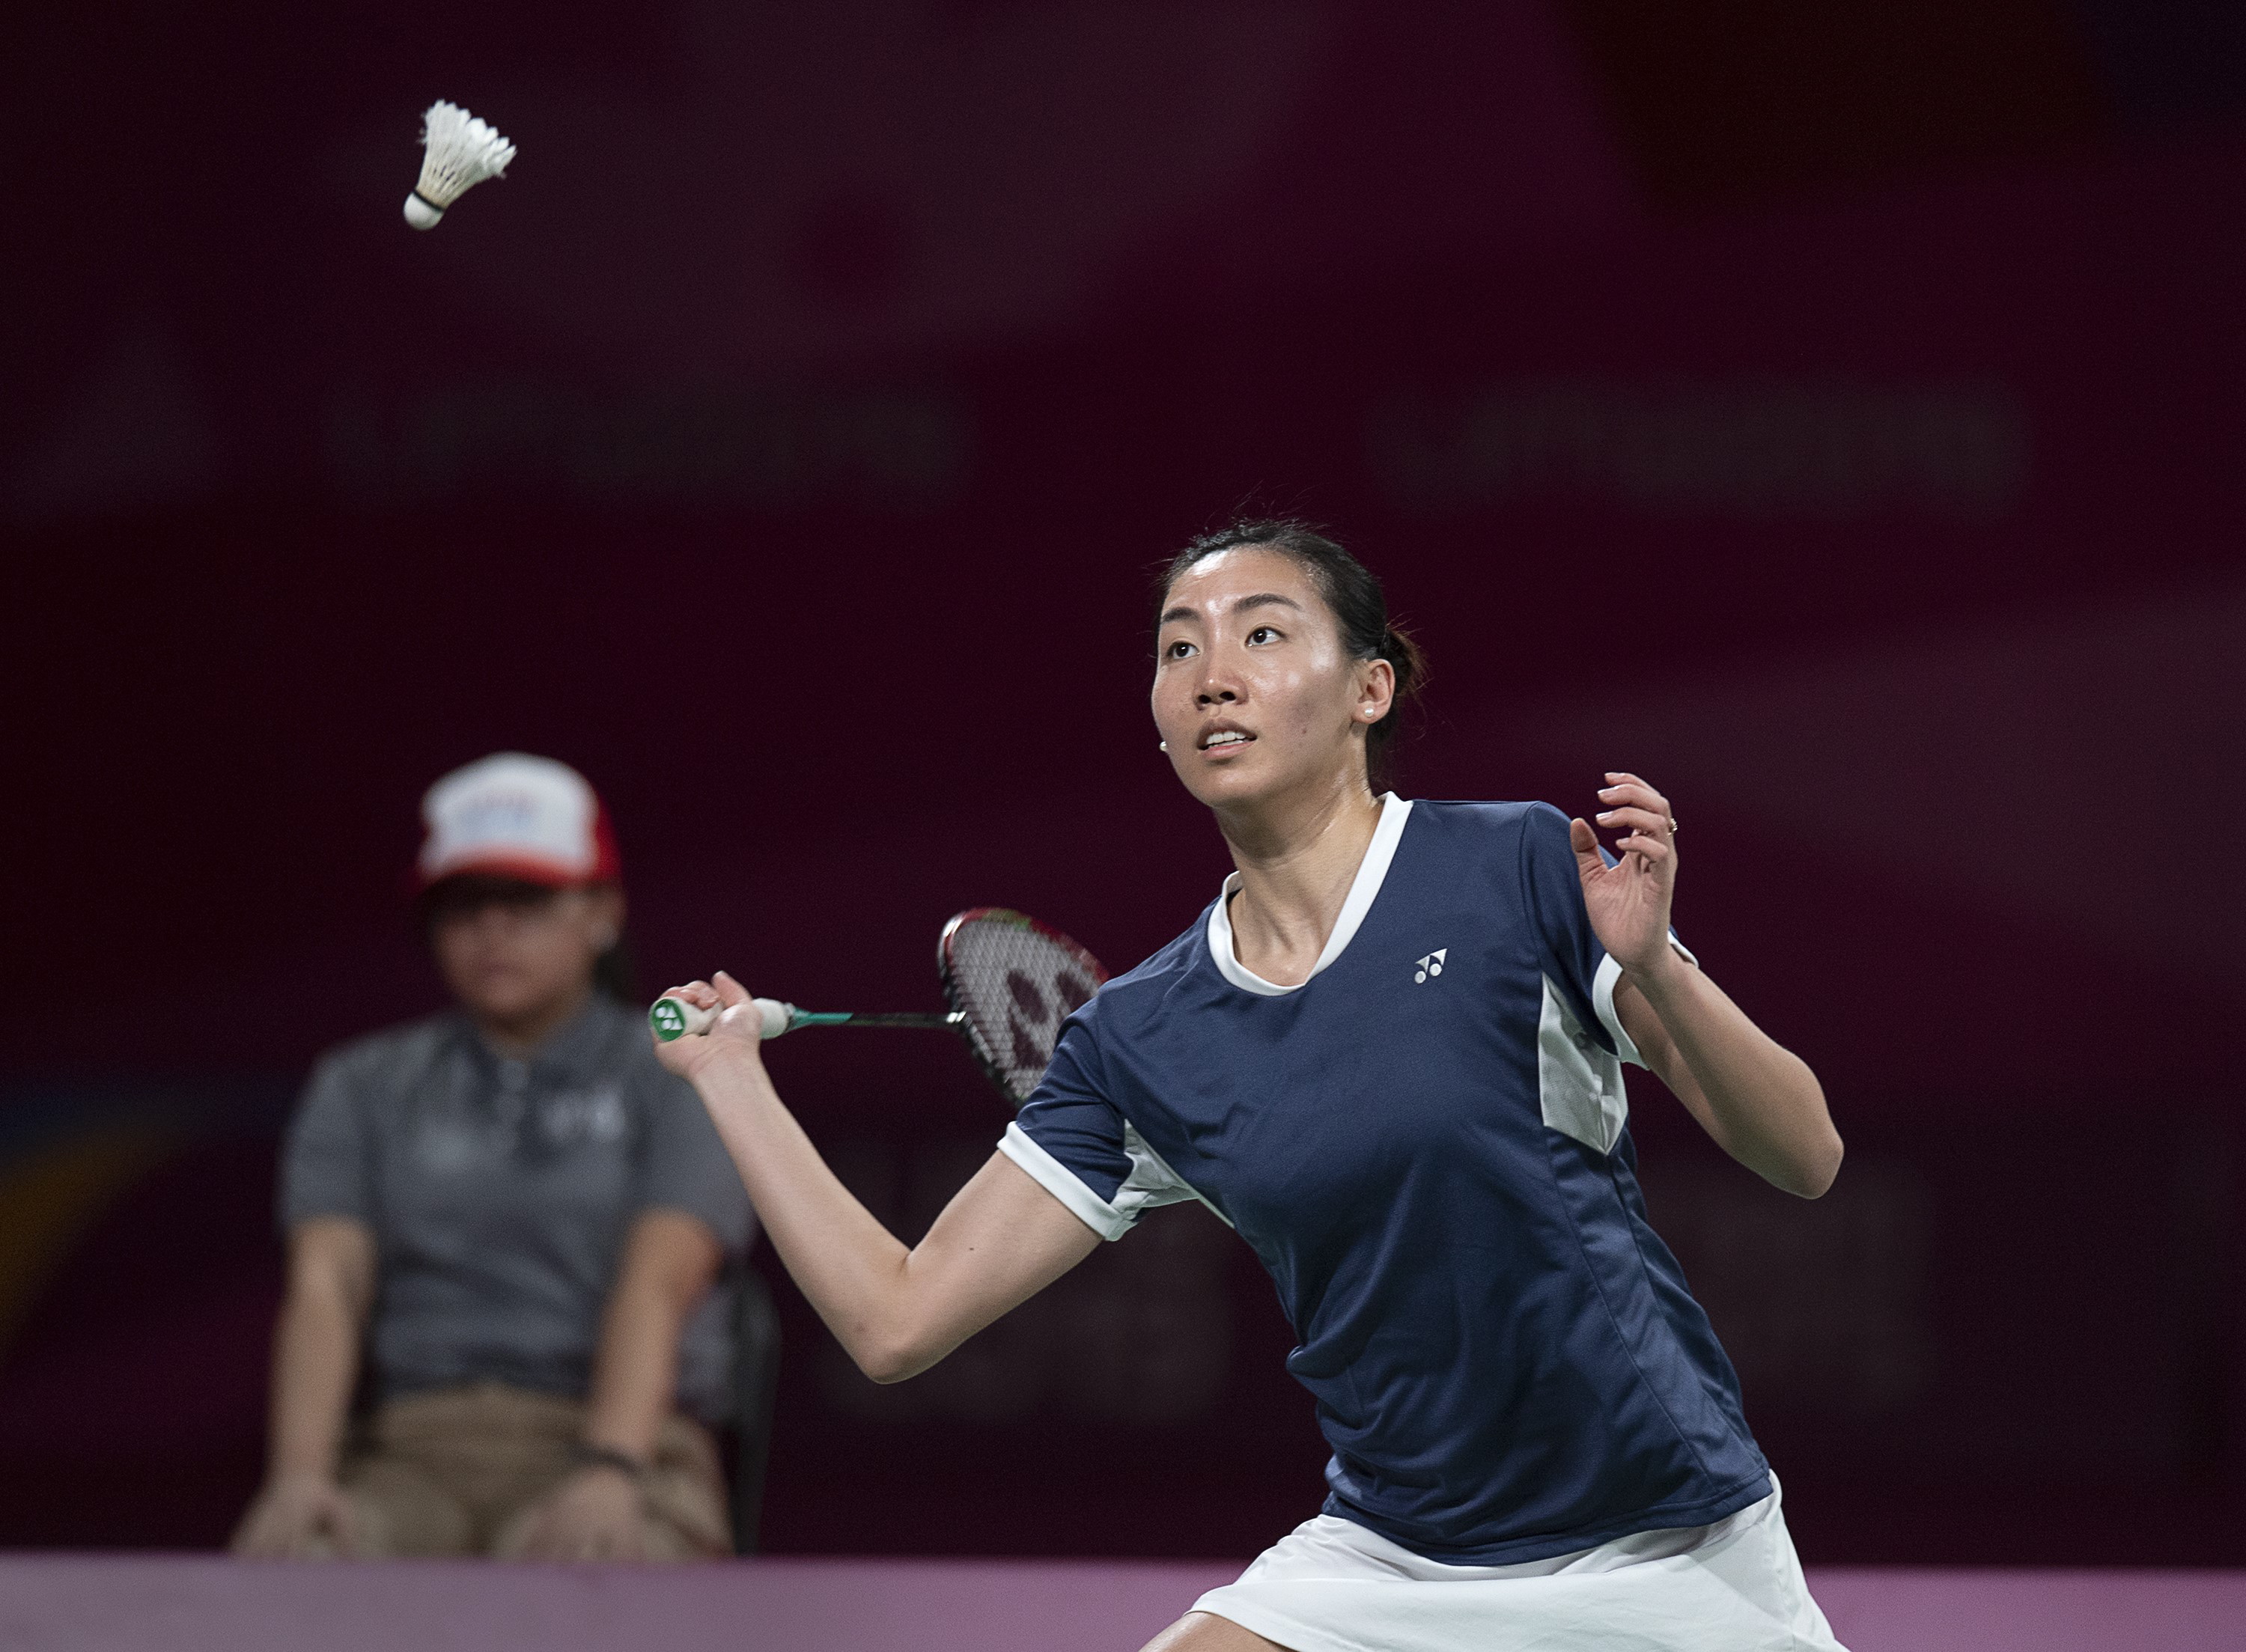 Michelle Li gets ready to return a shot at the Pan Am Games in Lima, Peru.